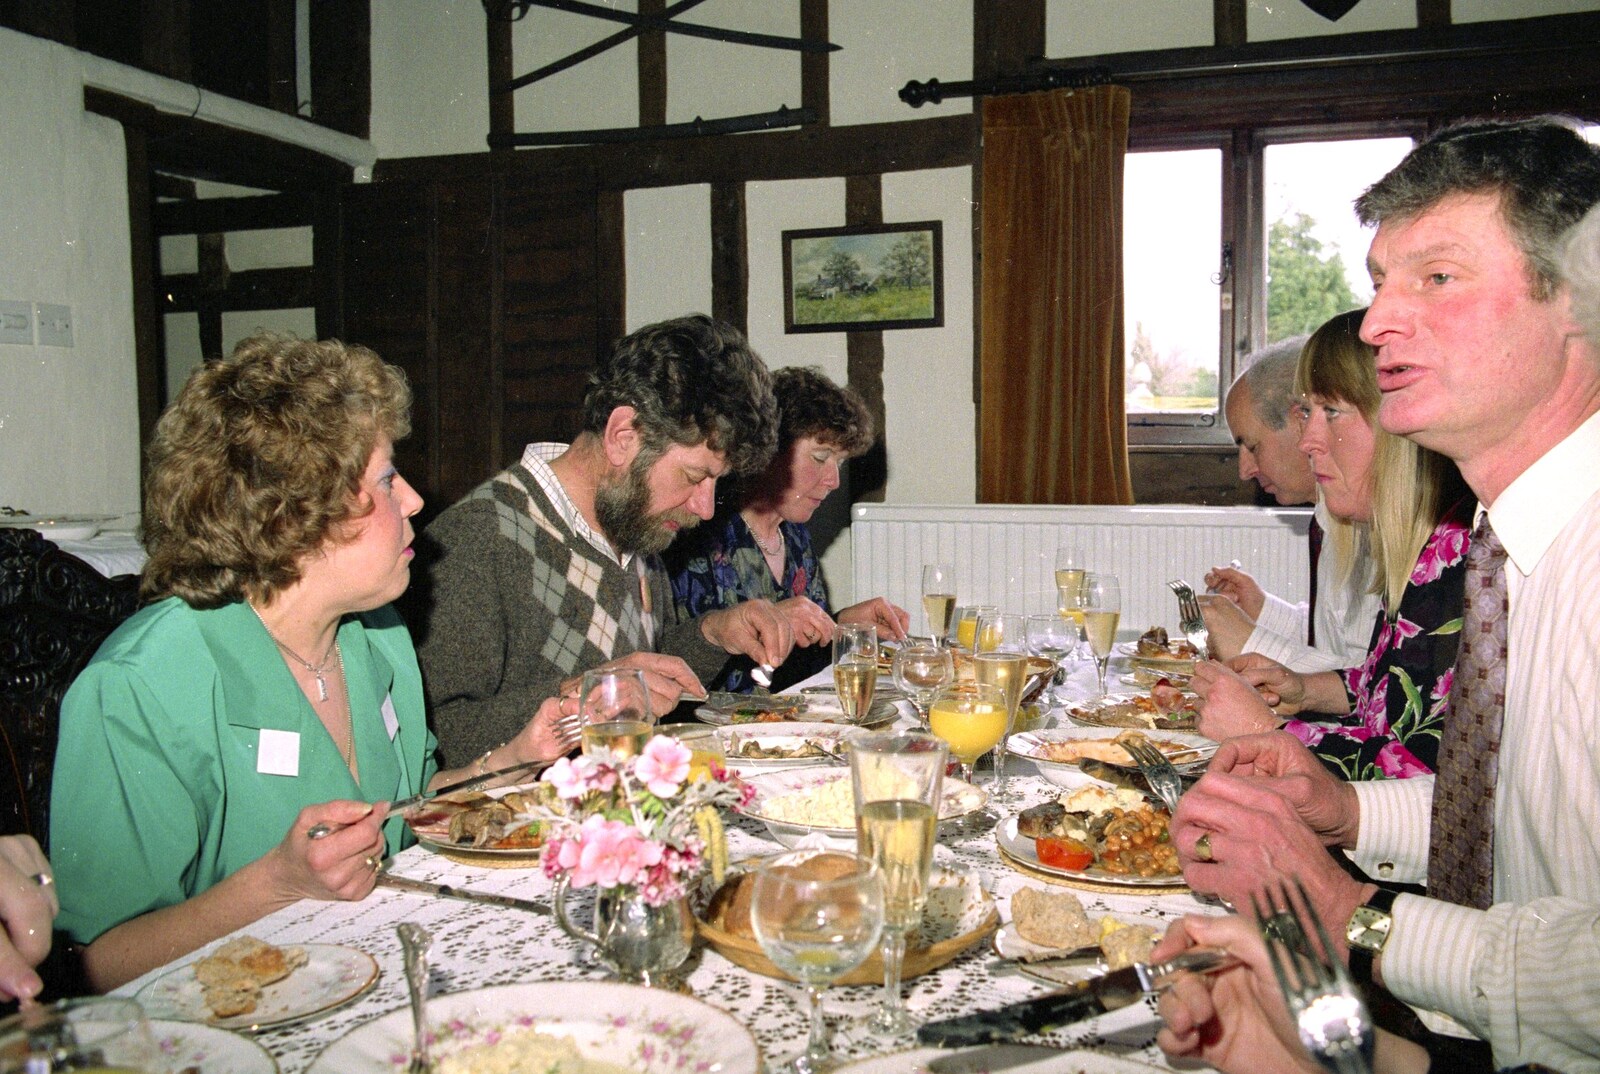 Time for dinner from Dinner Round Geoff and Brenda's, and Hamish Visits, Stuston, Suffolk - 6th April 1992